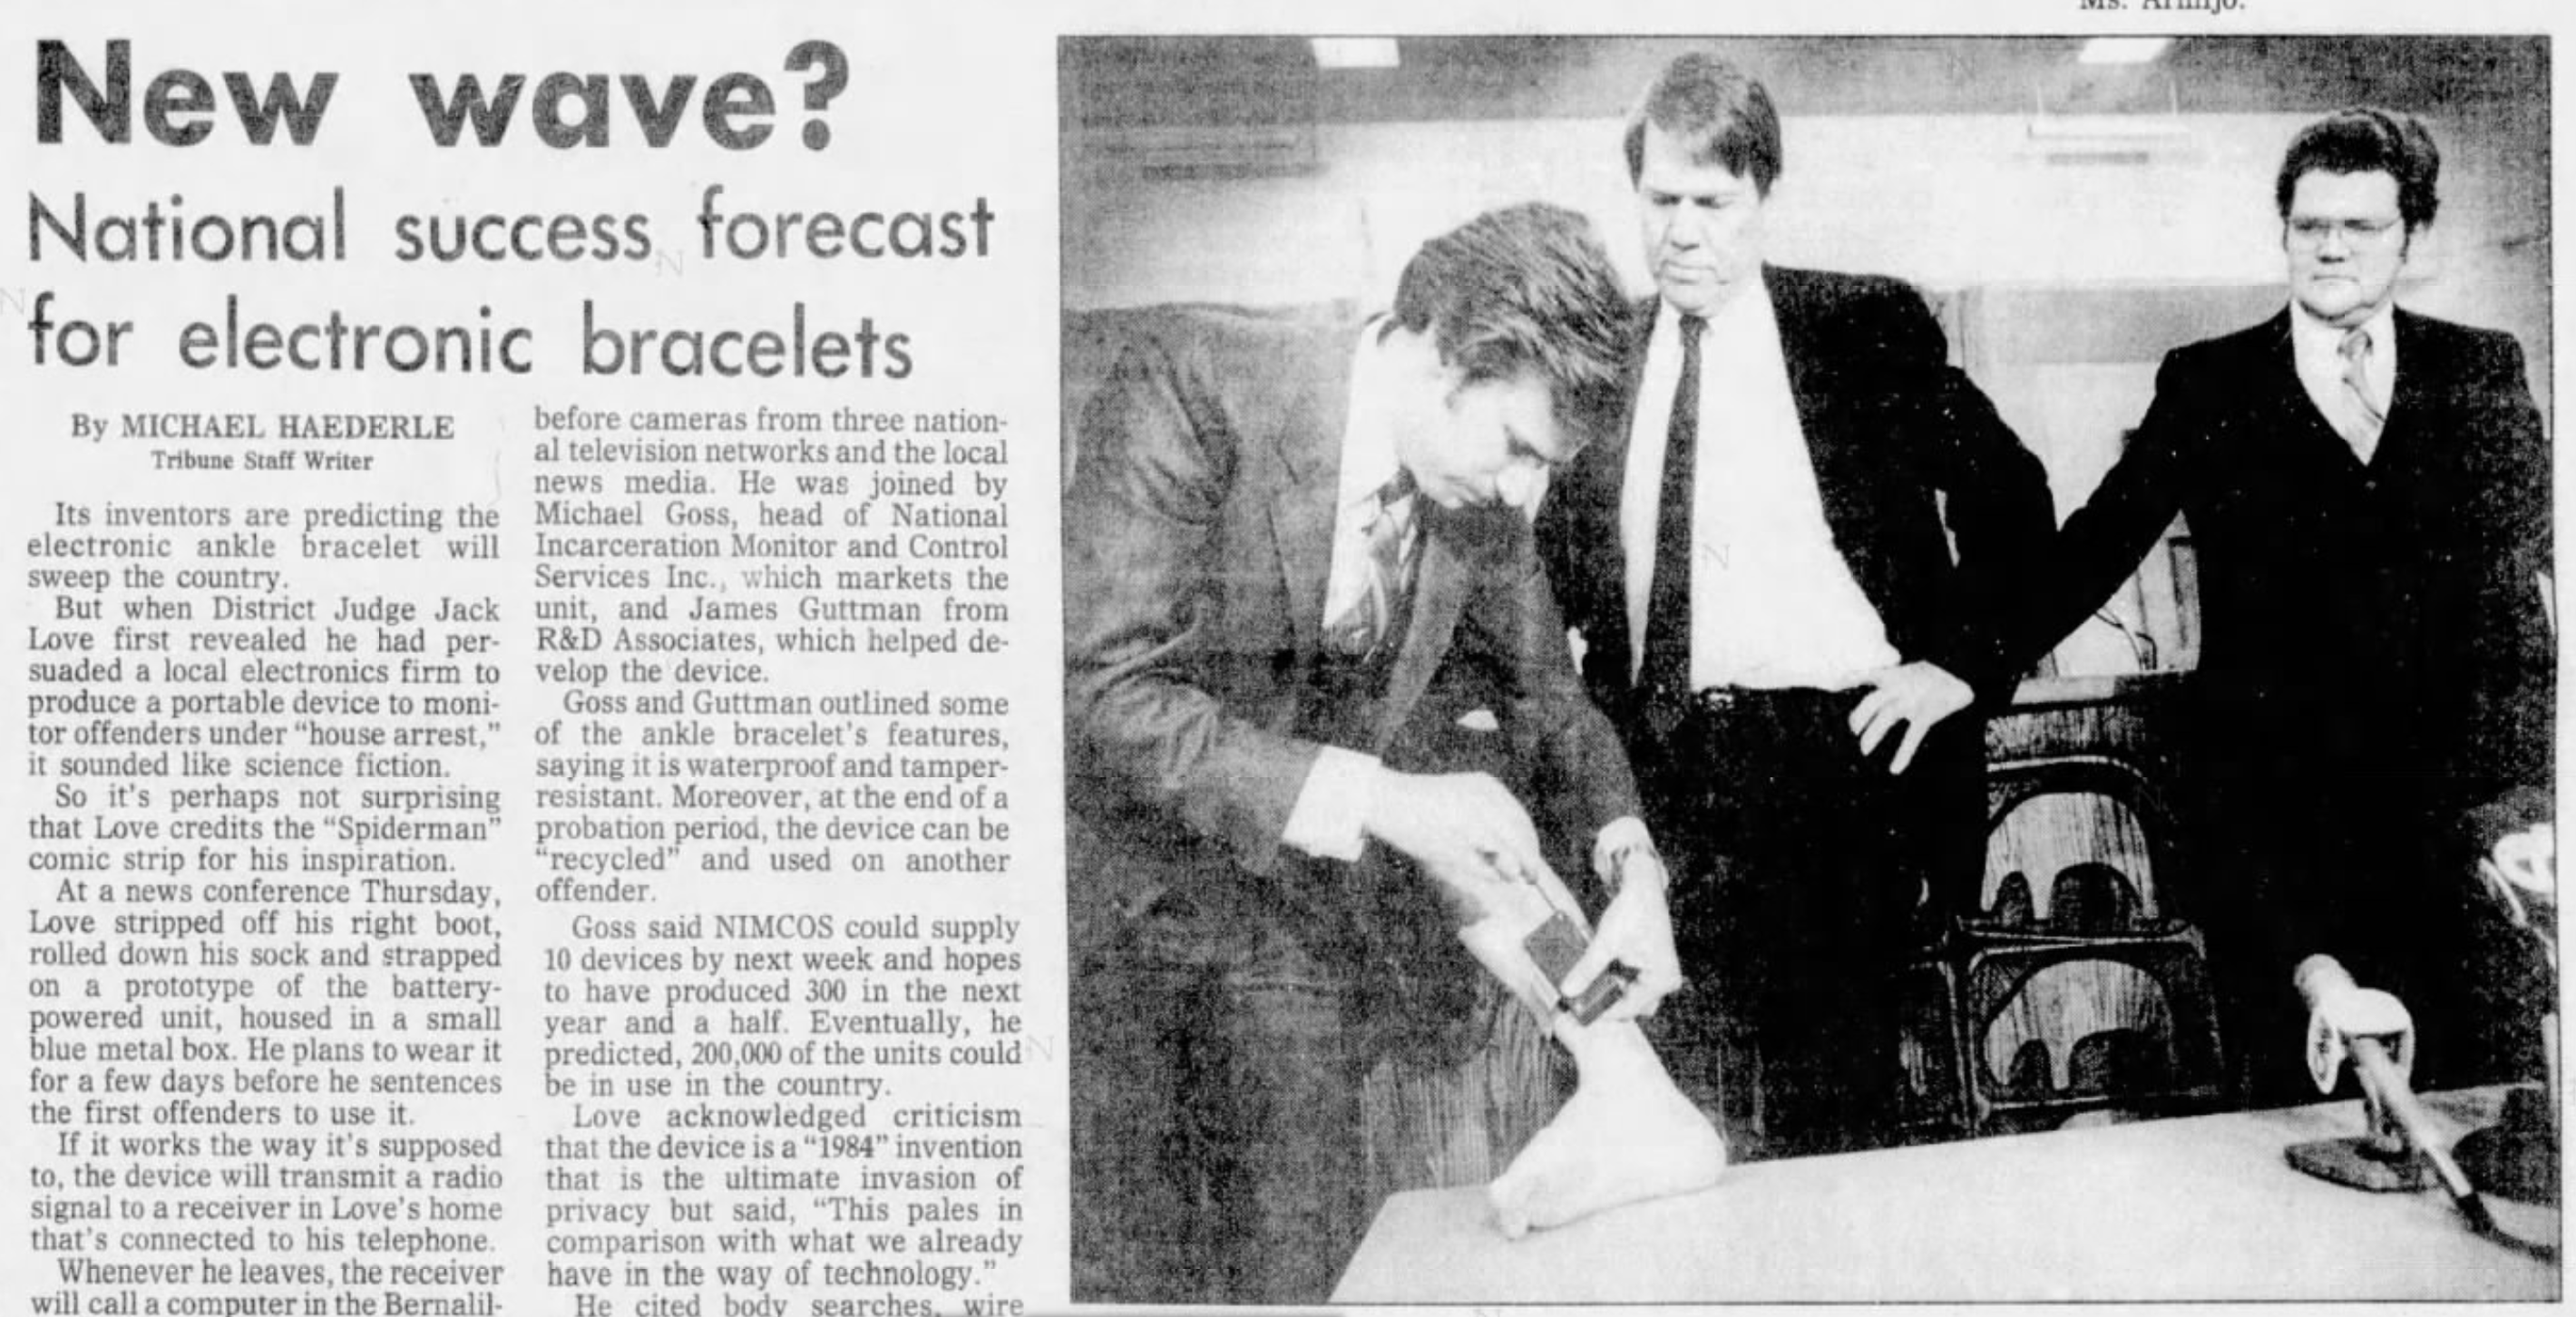 An article about the new electronic bracelets which ran in the March 18, 1983 edition of the Albuquerque Tribune in New Mexico. Judge Jack Love is in the middle with Michael Goss on the right. James Guttmann, who helped Goss build the device, is on the left. (Screenshot: Newspapers.com, Fair Use)